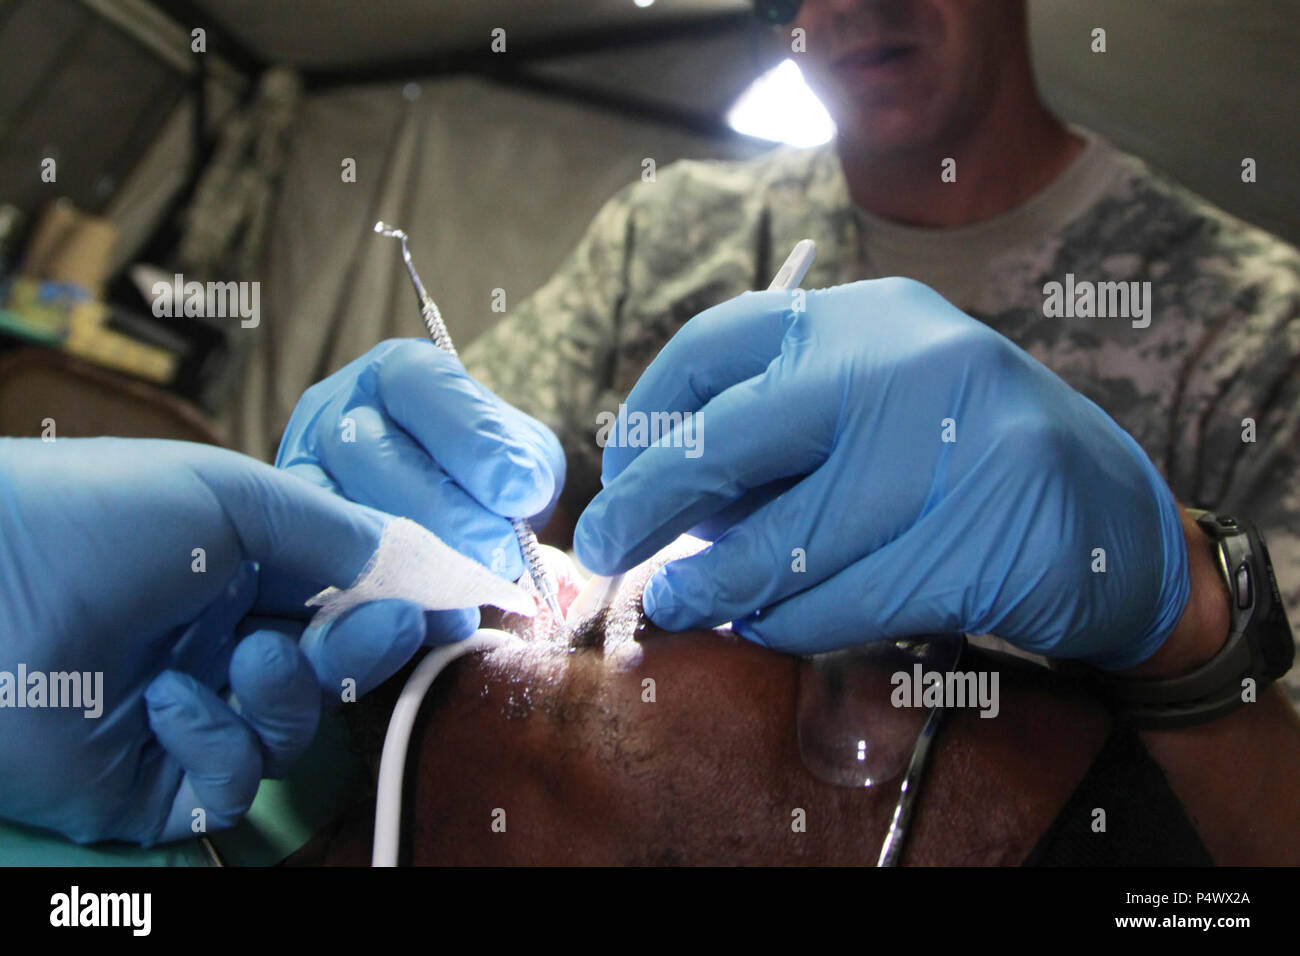 U.S. Army dental staff, with the Wyoming National Guard Medical Detachment, remove the tooth of a Belizean boy during a medical readiness event held in San Ignacio, Belize, May 09, 2017. This is the second of three medical events that are scheduled to take place during Beyond the Horizon 2017. BTH 2017 is a U.S. Southern Command-sponsored, Army South-led exercise designed to provide humanitarian and engineering services to communities in need, demonstrating U.S. support for Belize. Stock Photo